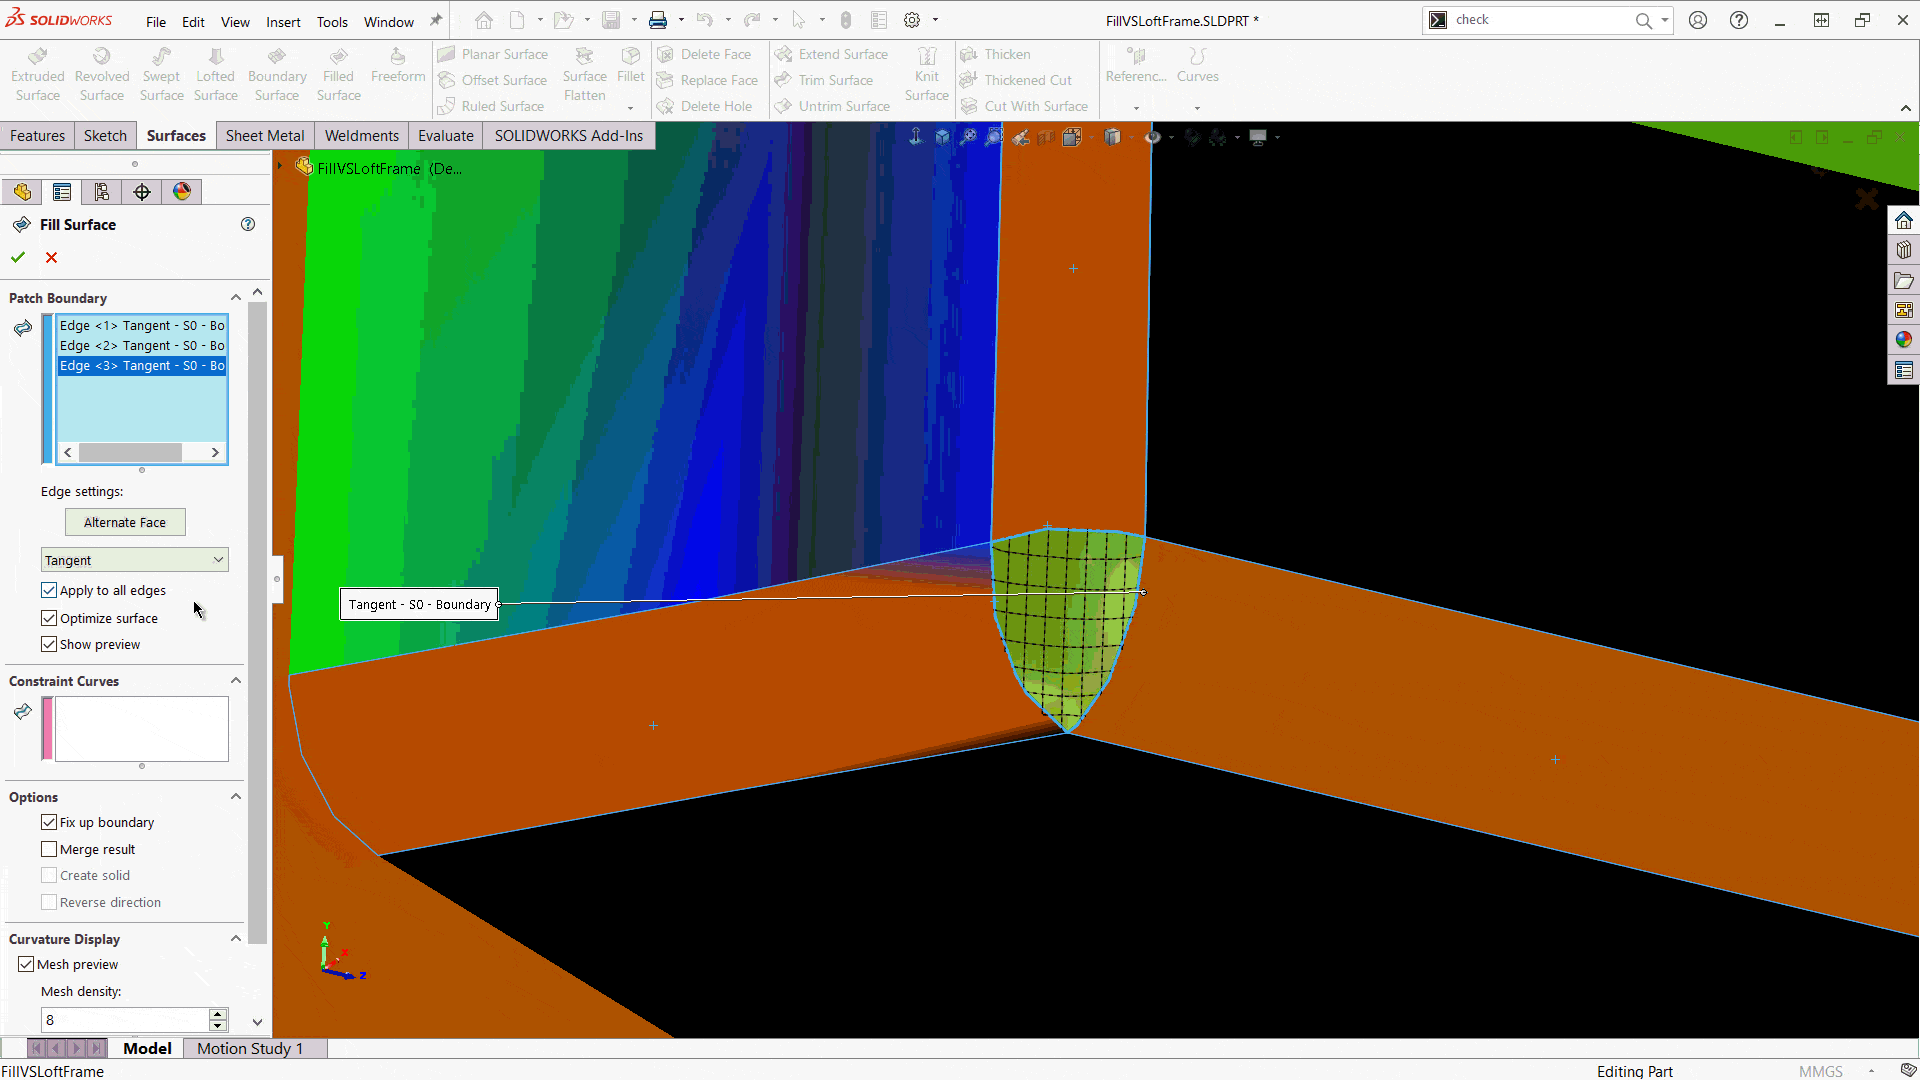 Surface modeling provides different methods to solve the same problem, such as a loft or fill surface to close a gap.